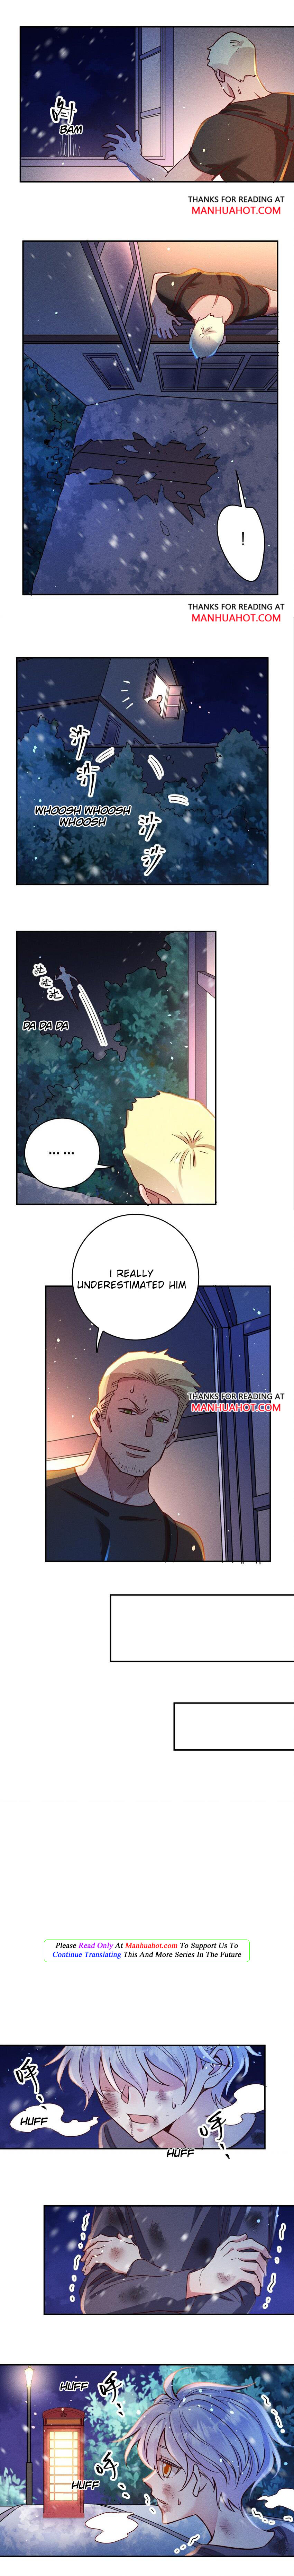 Love You Is My Fault - Page 3